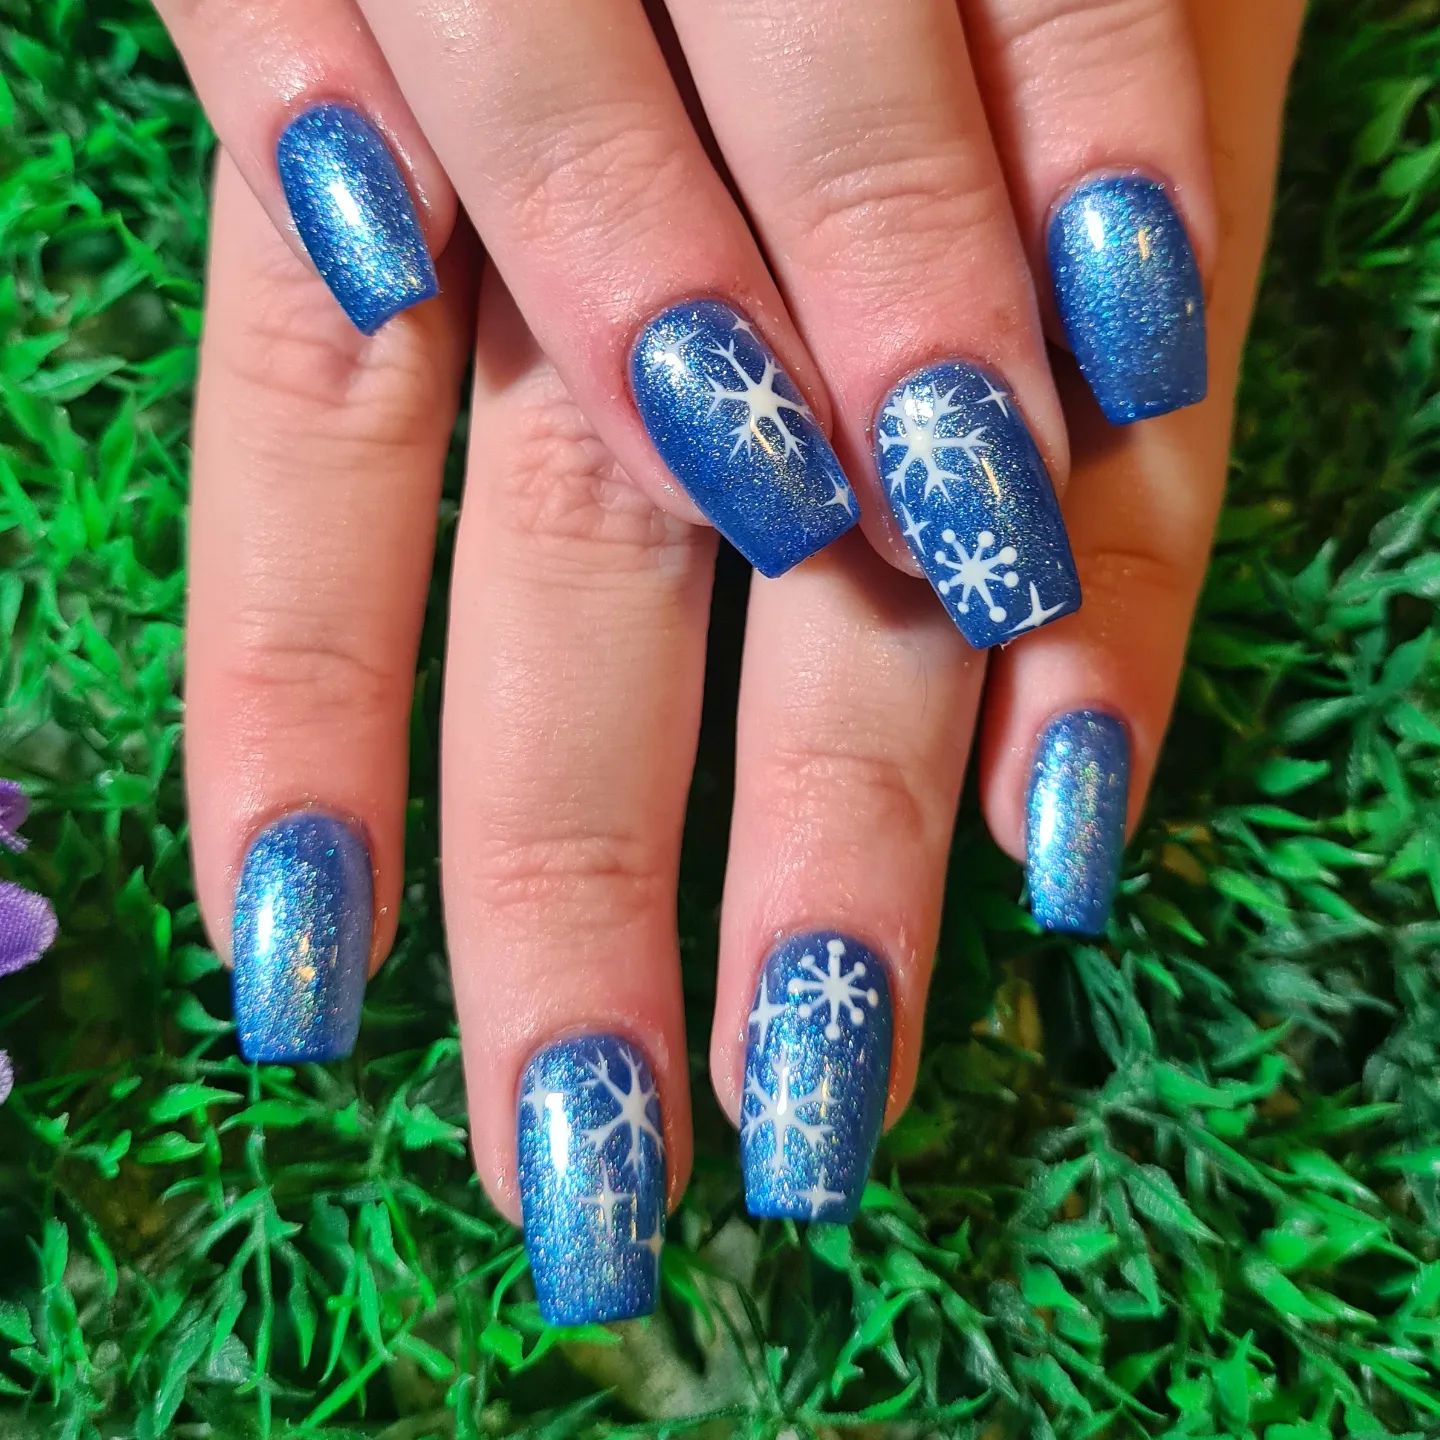 Blue glittered nails look like the sky and snowflakes fall from the sky in this image. The nail art and nail polish go with each other.